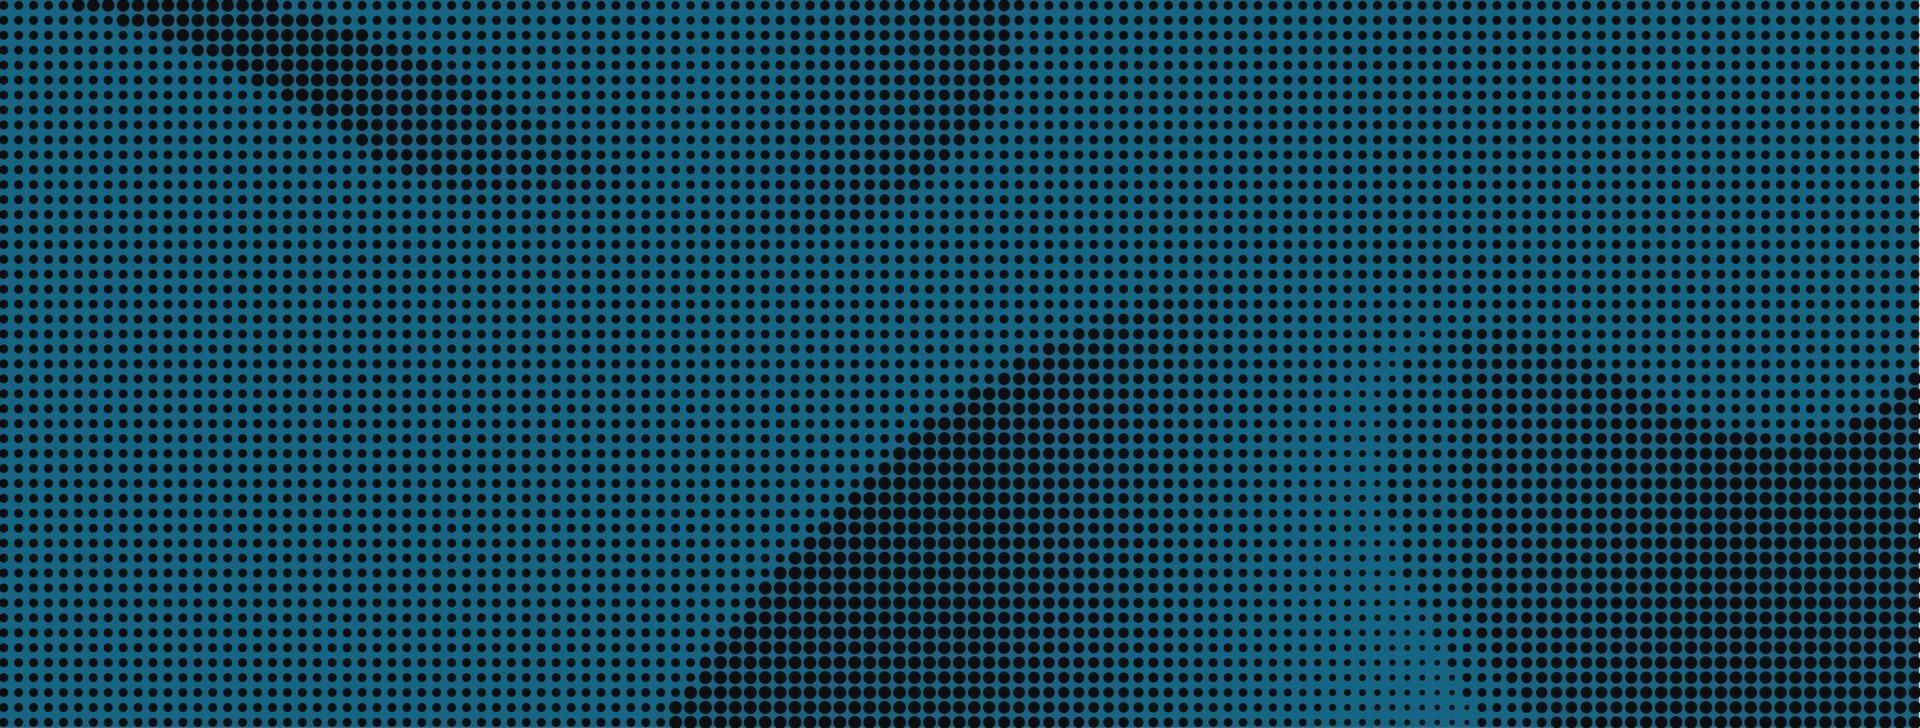 Abstract wave halftone vector background in blue and black colors